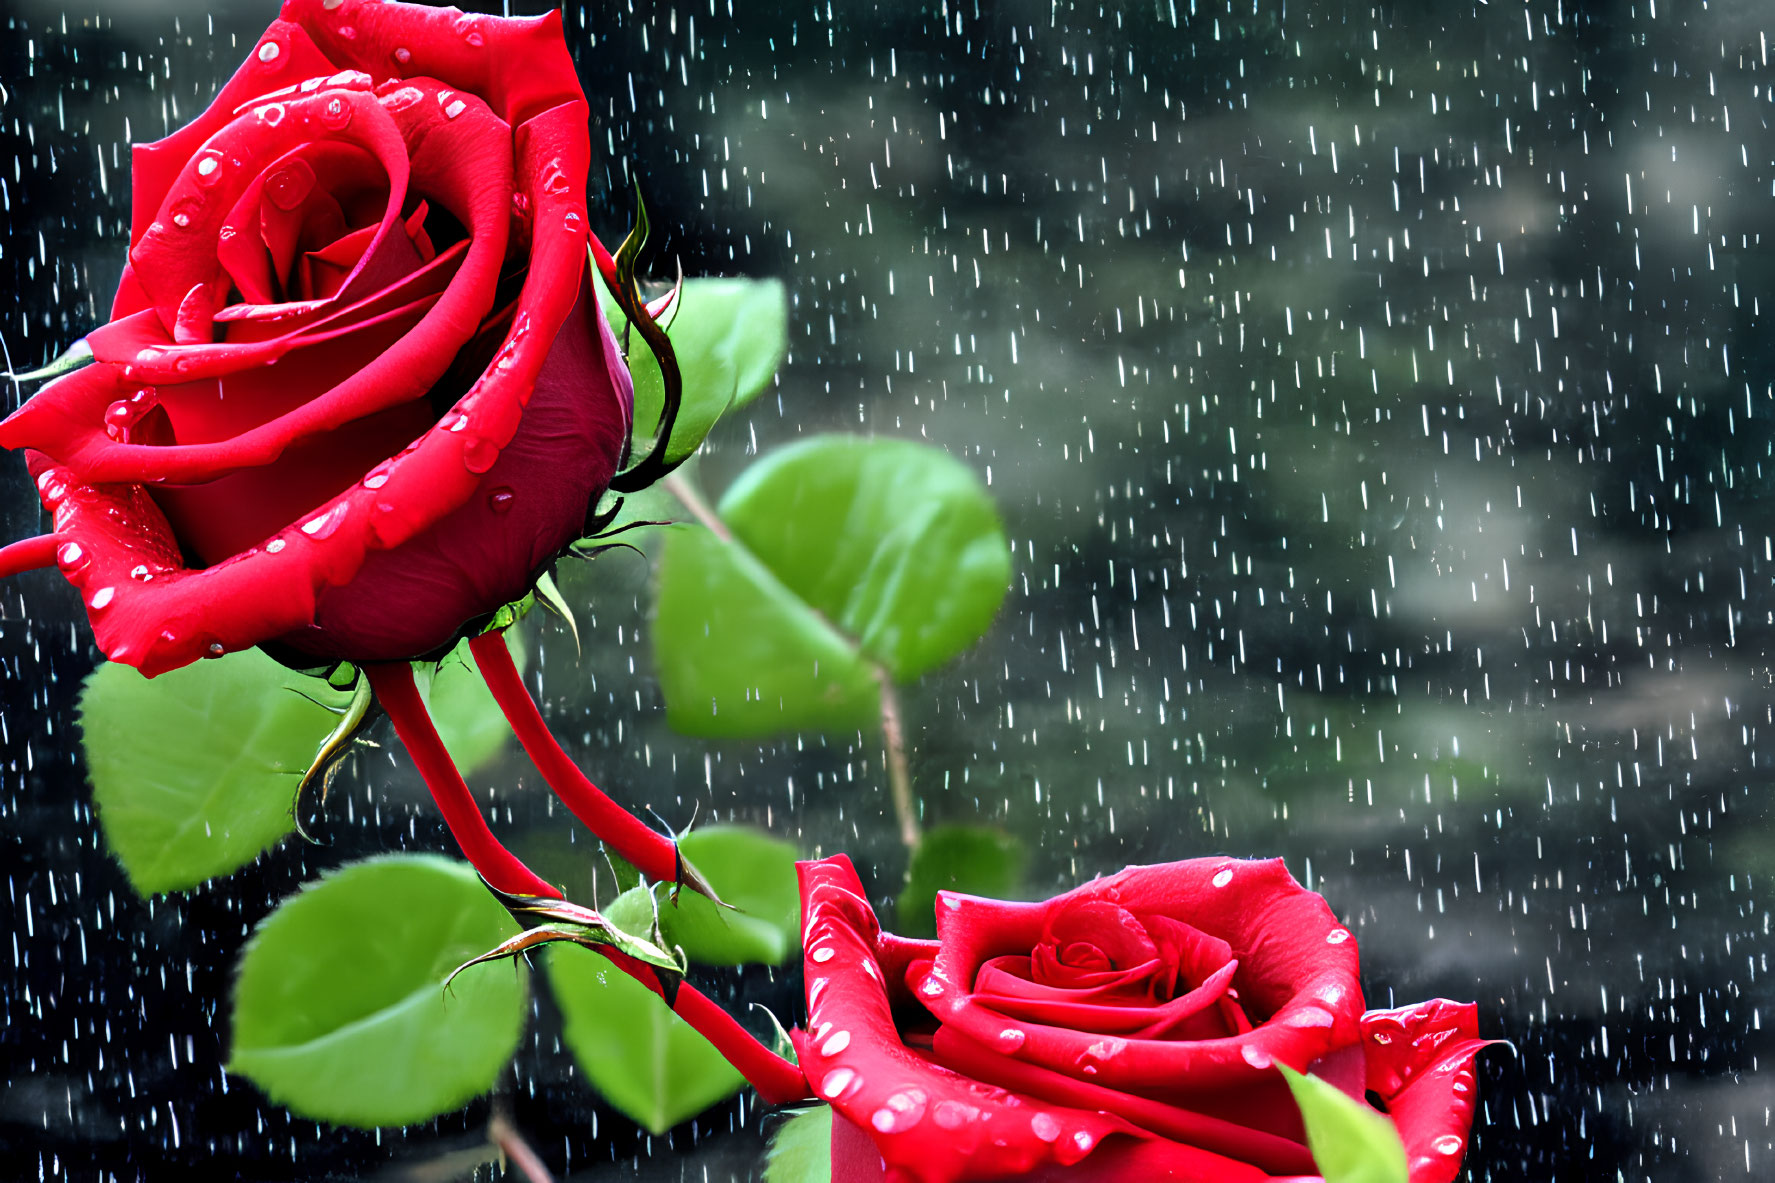 Red Rose with Water Droplets in Falling Rain